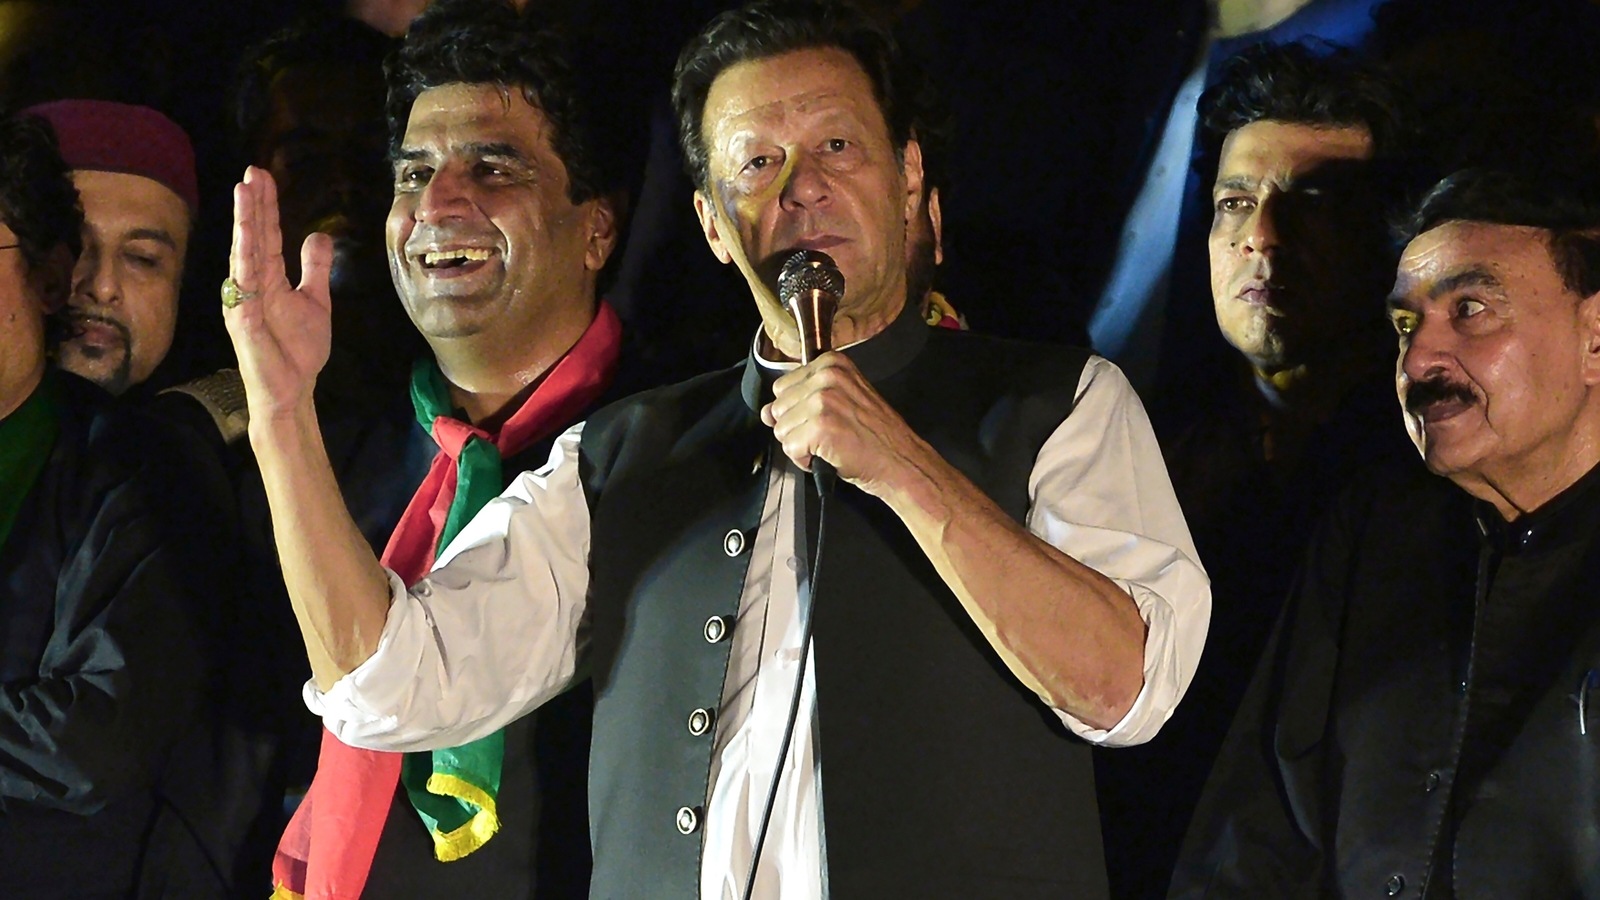 pti-to-challenge-disqualification-ruling-against-imran-party-leader-says-decision-by-former-servant